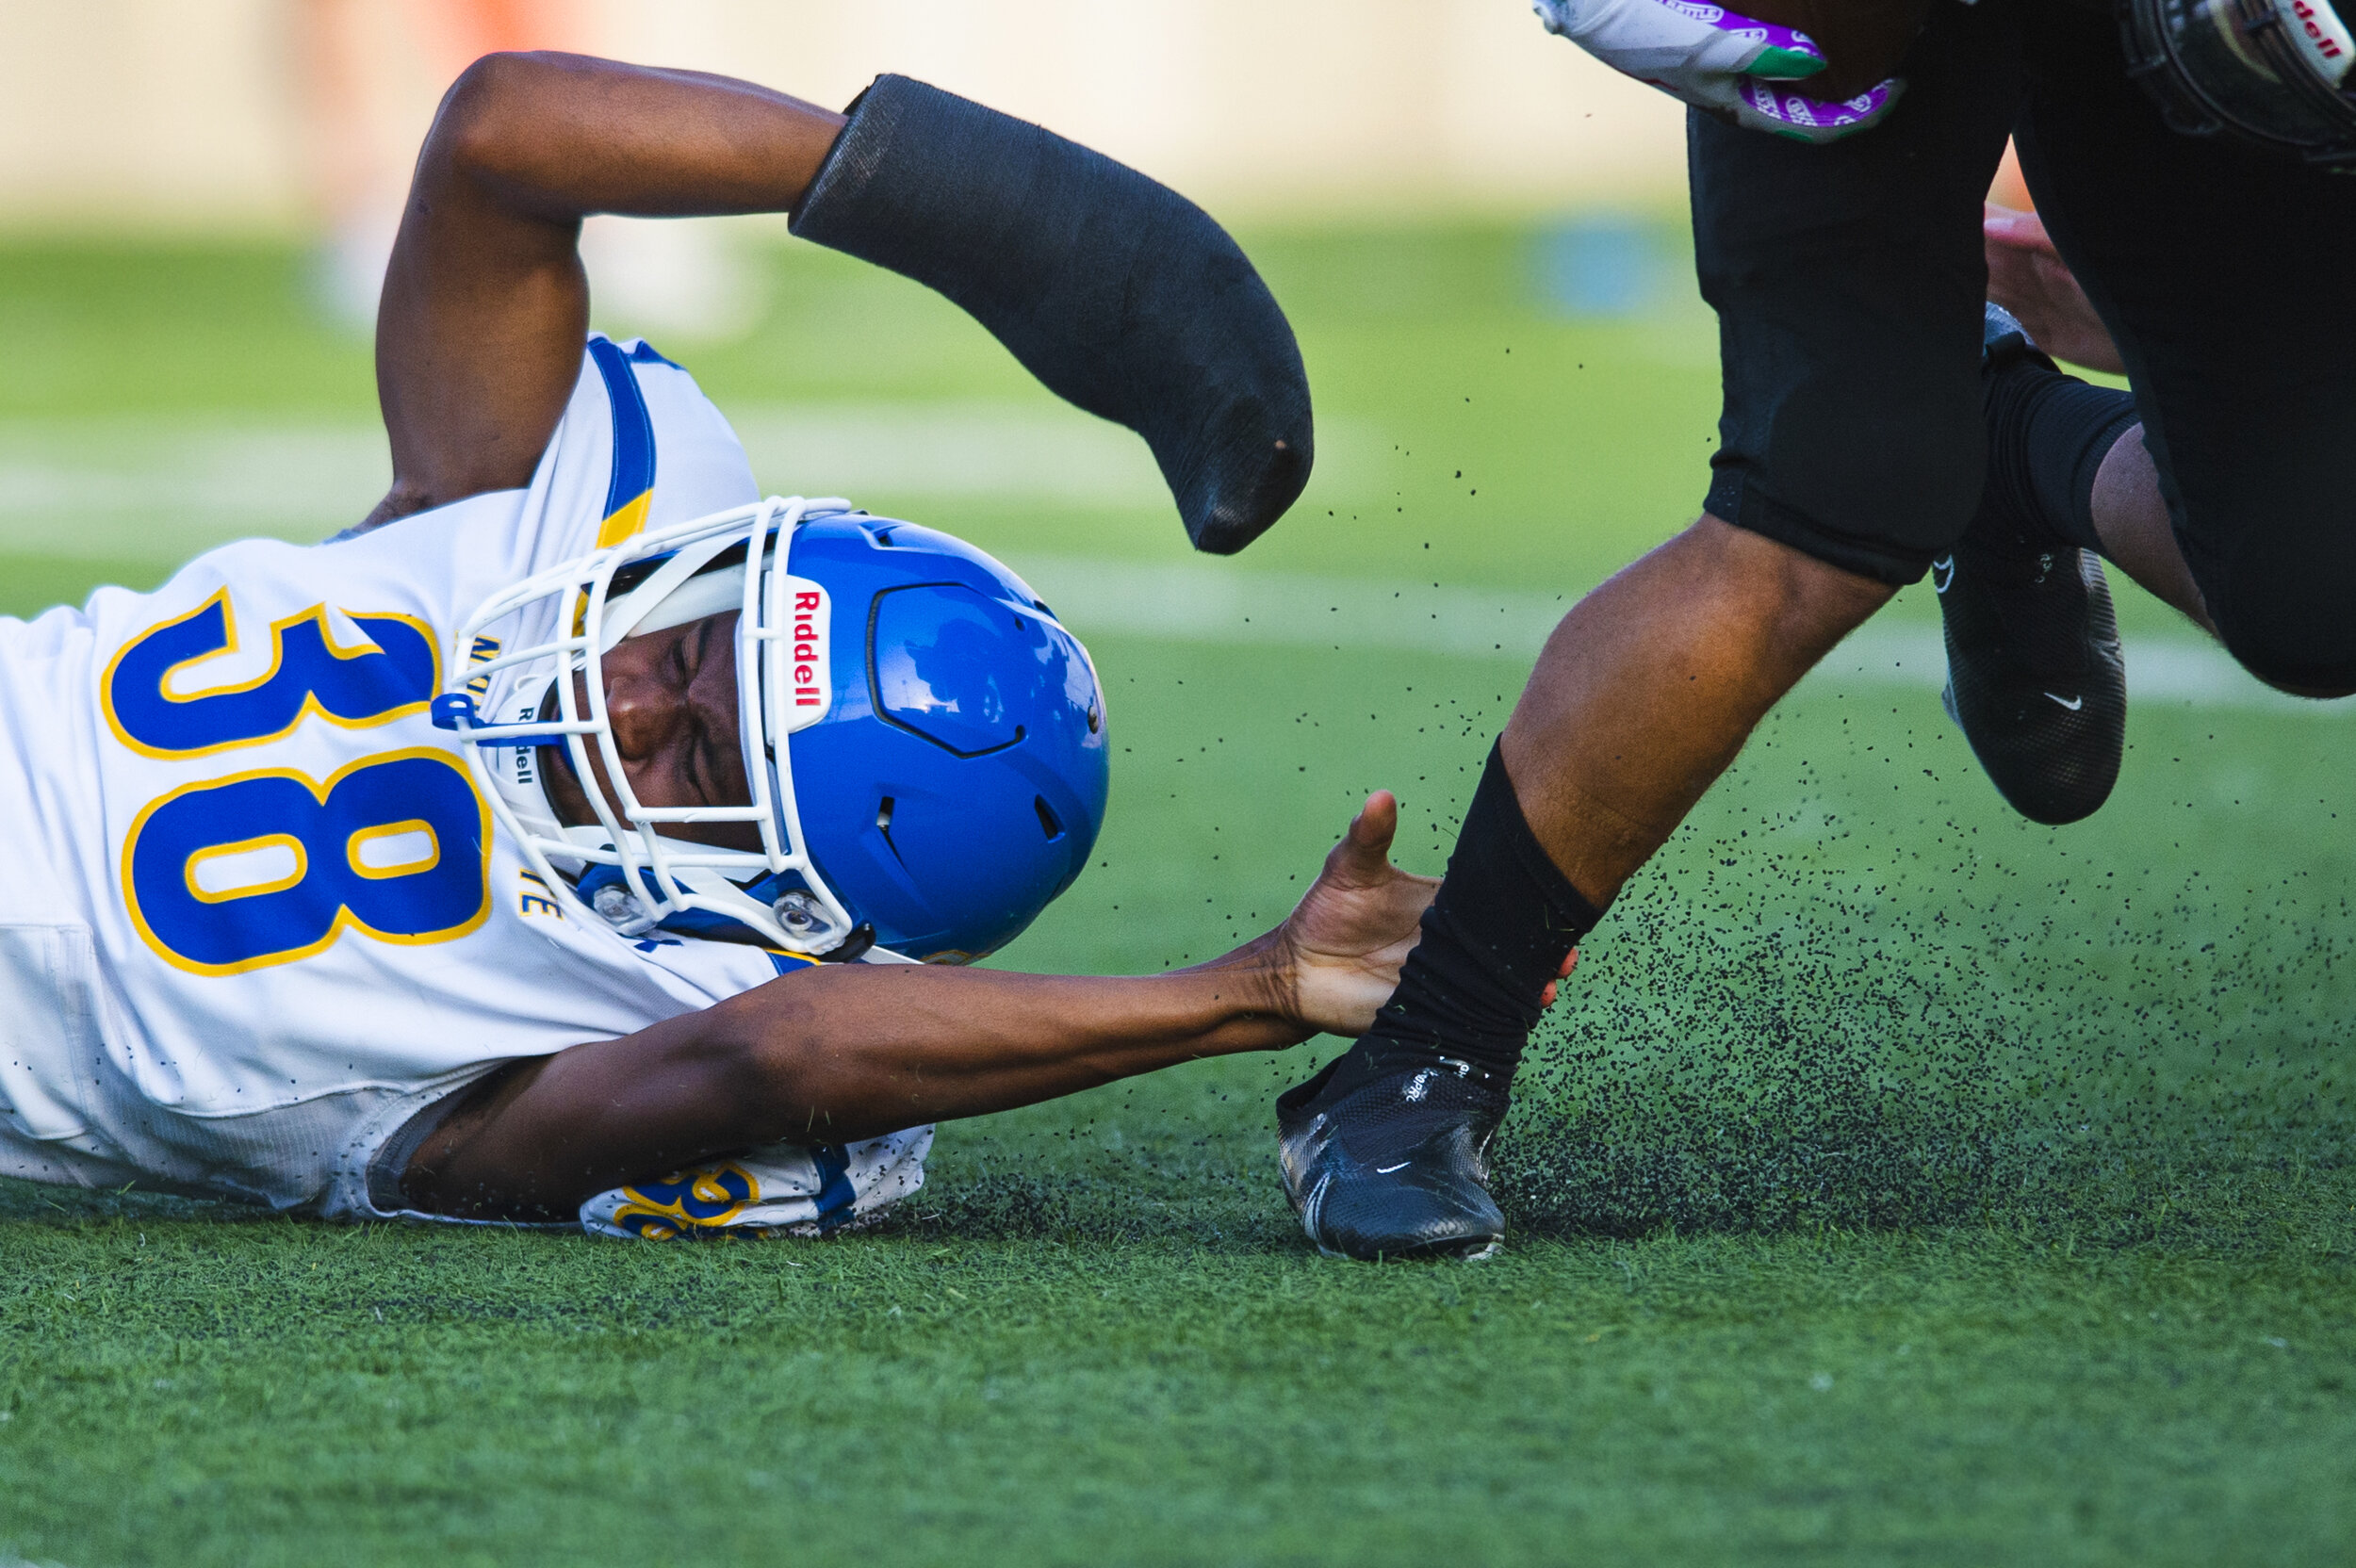  North Platte's Kymani Sterling (38) loses his grip on Lincoln Northeast ball carrier Xavier Gary (4) as he attempts to return a punt in the third quarter at Seacrest Field on Friday, September 25, 2020, in Lincoln, Nebraska. KENNETH FERRIERA, Journa